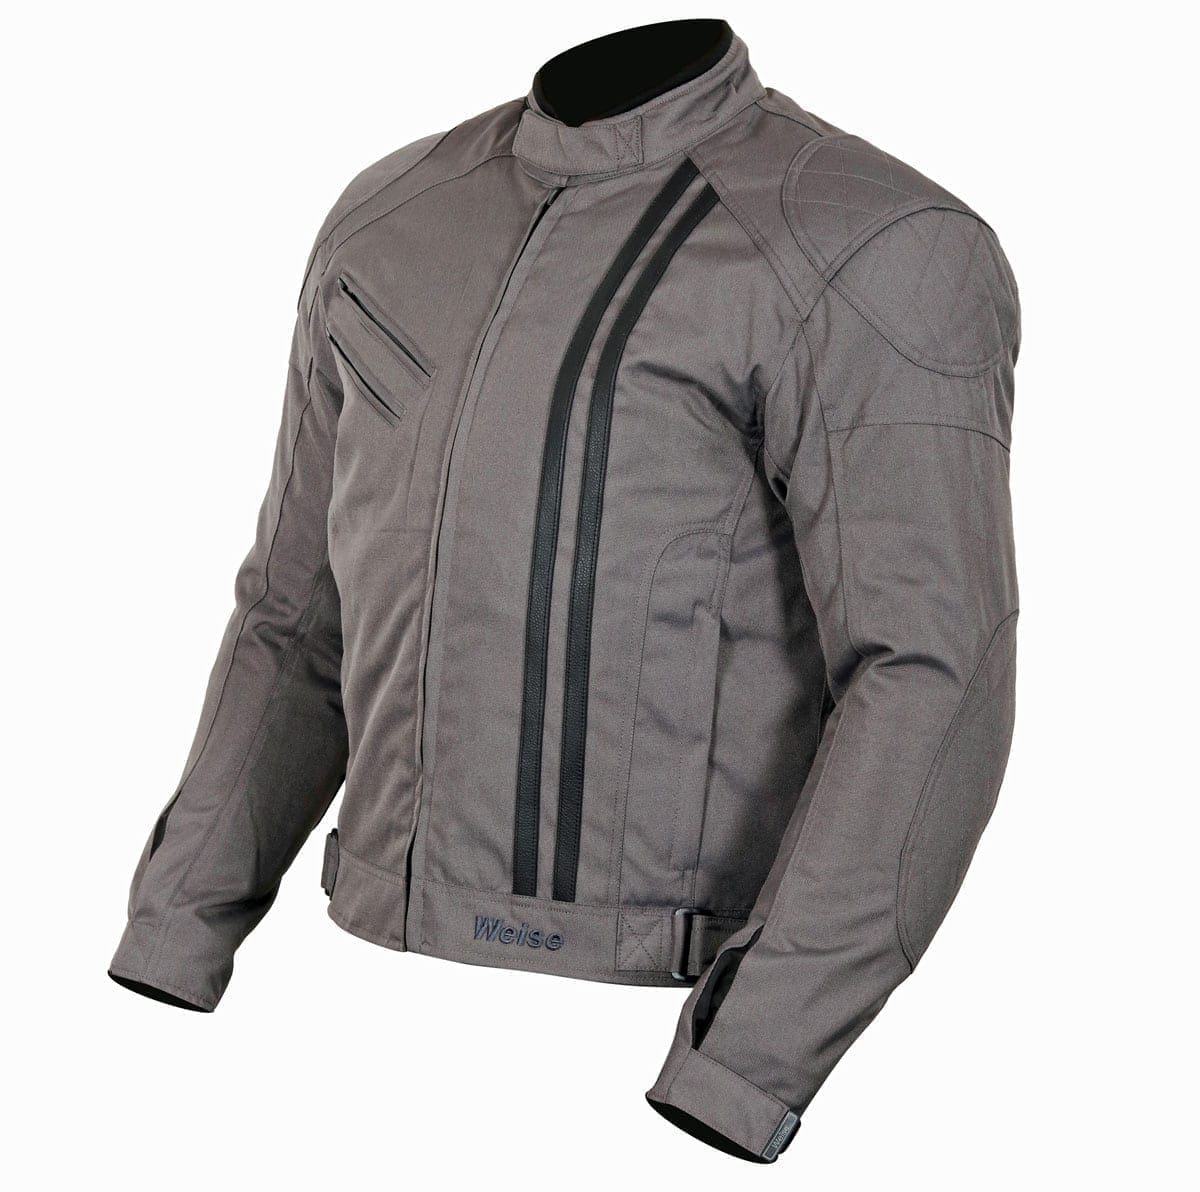 WIN a Weise Outlaw Jacket worth £149.99